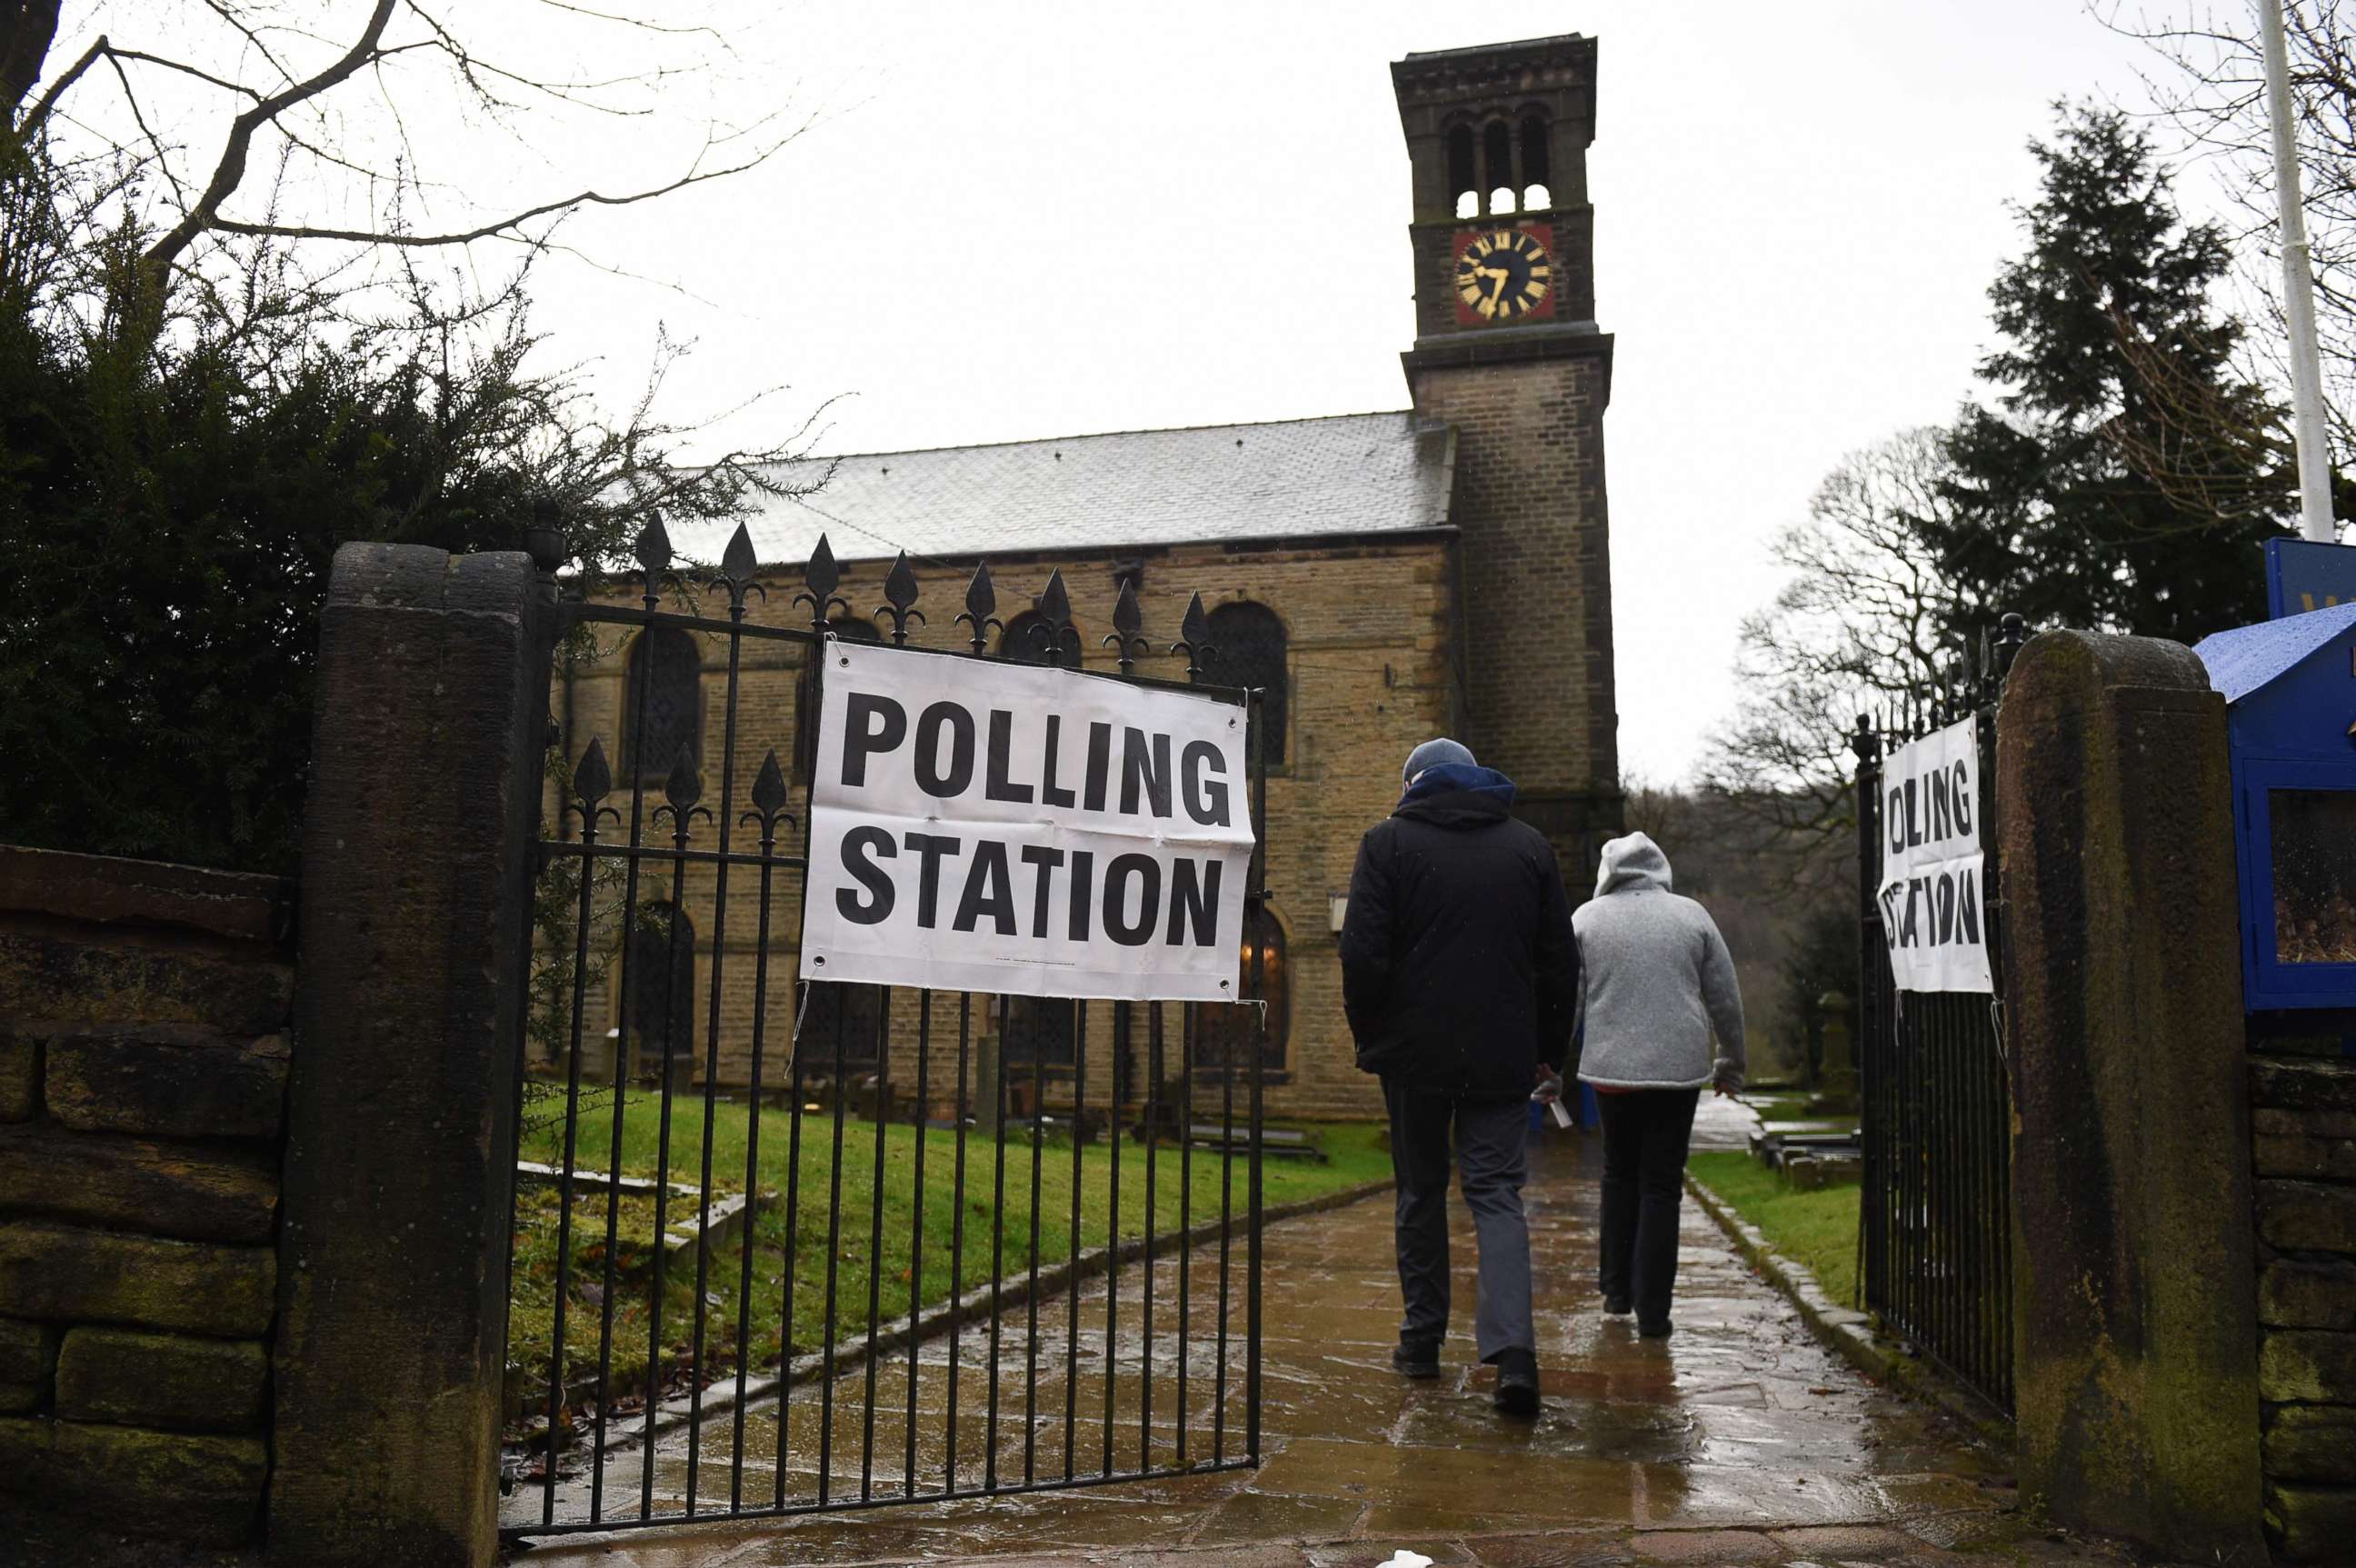 PHOTO: Residents arrive to vote at a polling station in Dobcross, northwest England, as Britain holds a general election on Dec. 12, 2019.